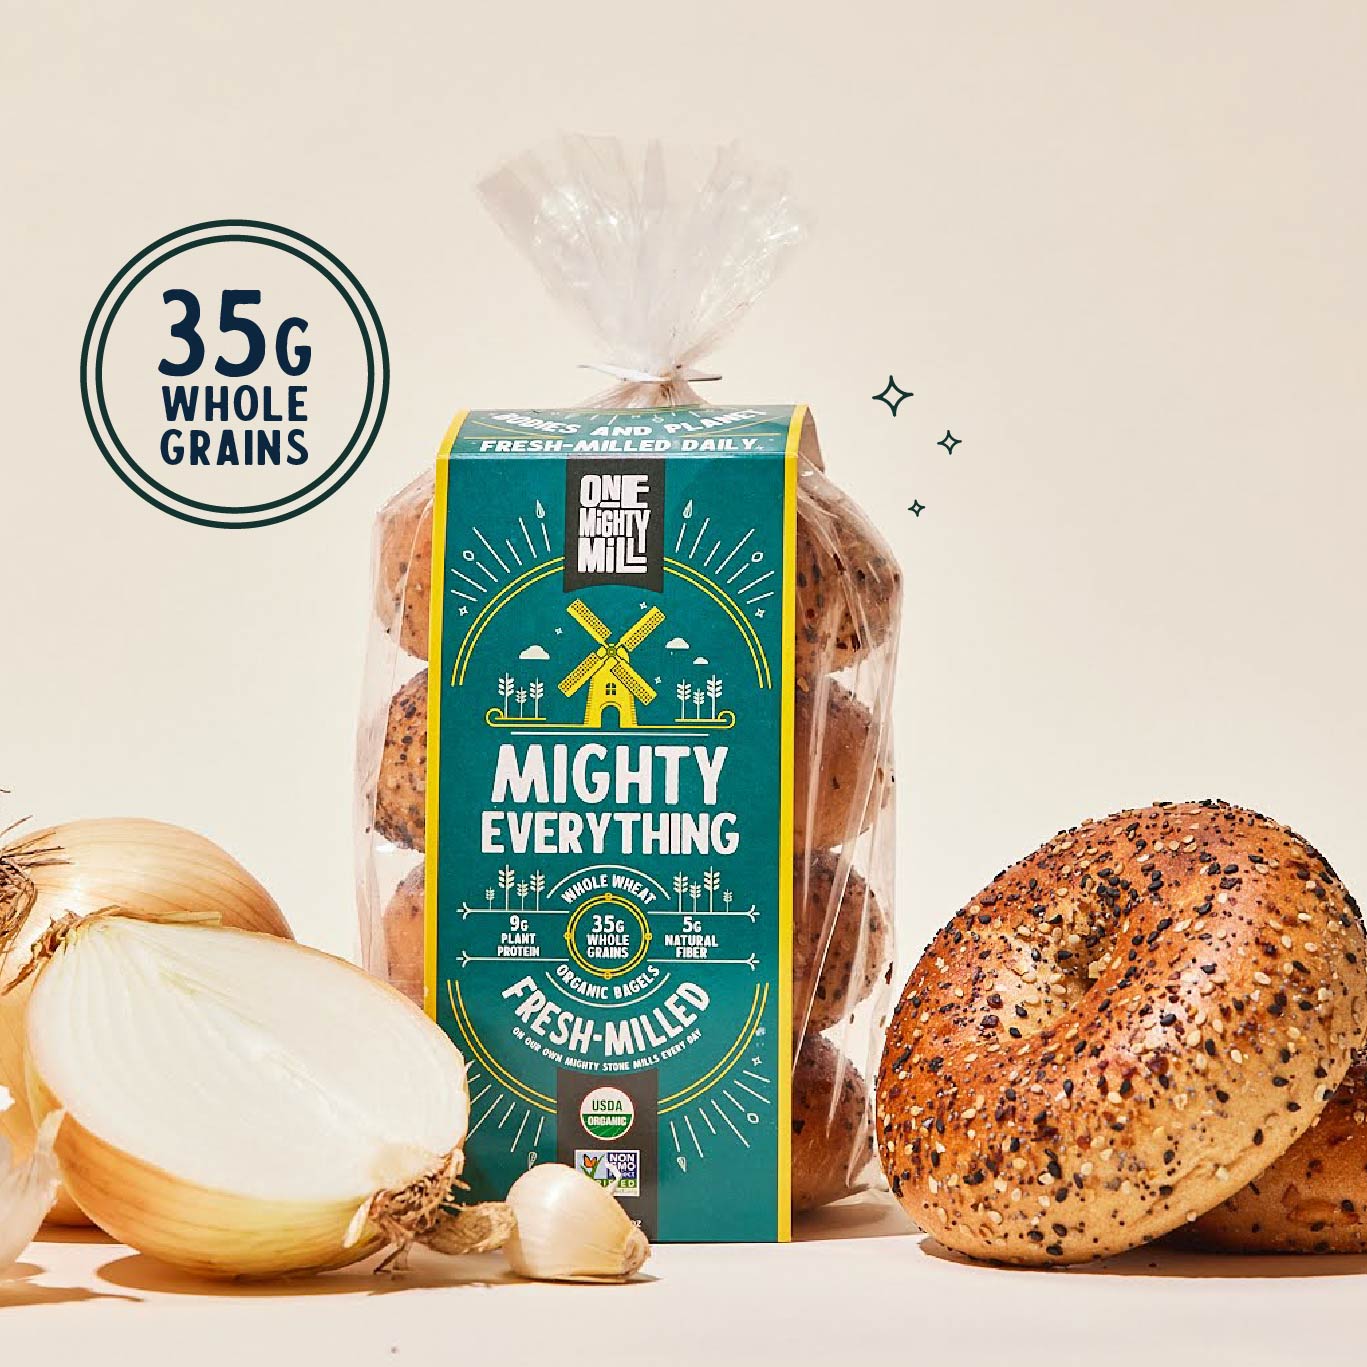 Fresh-Milled Bread – One Mighty Mill